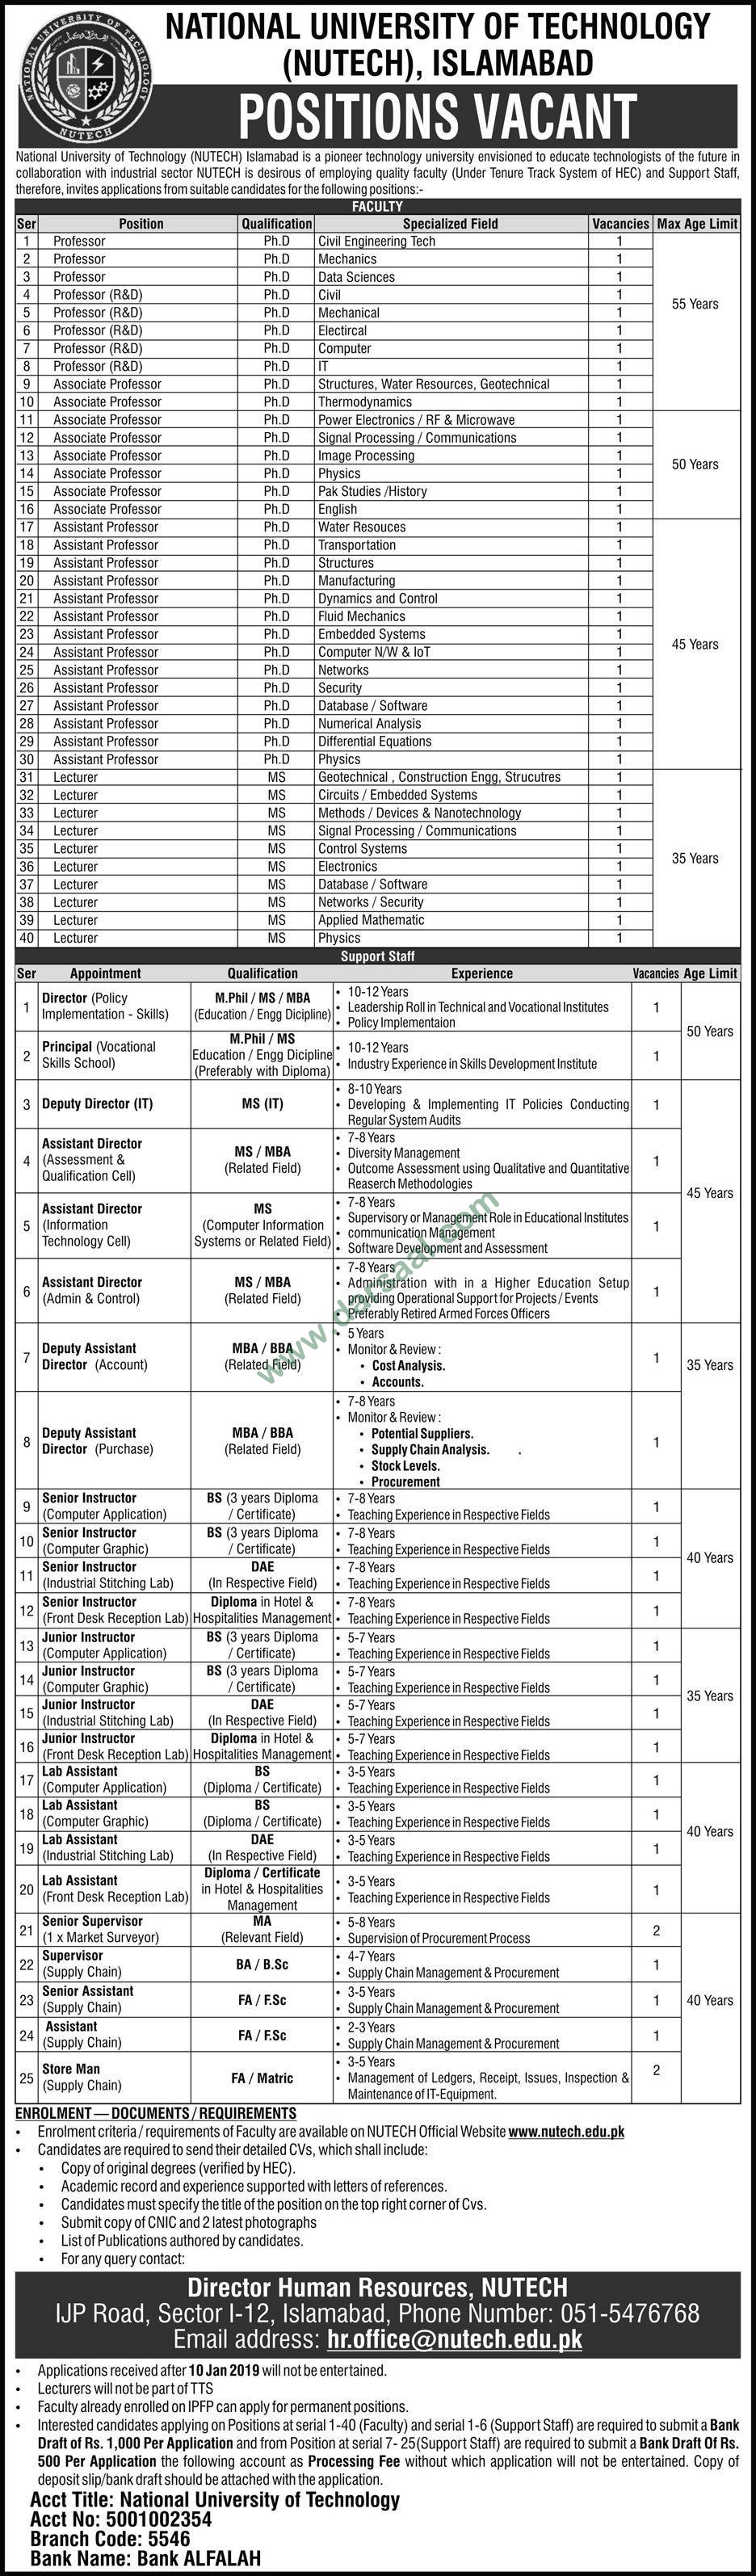 Lecturer Jobs in National University of Technology in Islamabad - Dec 24, 2018